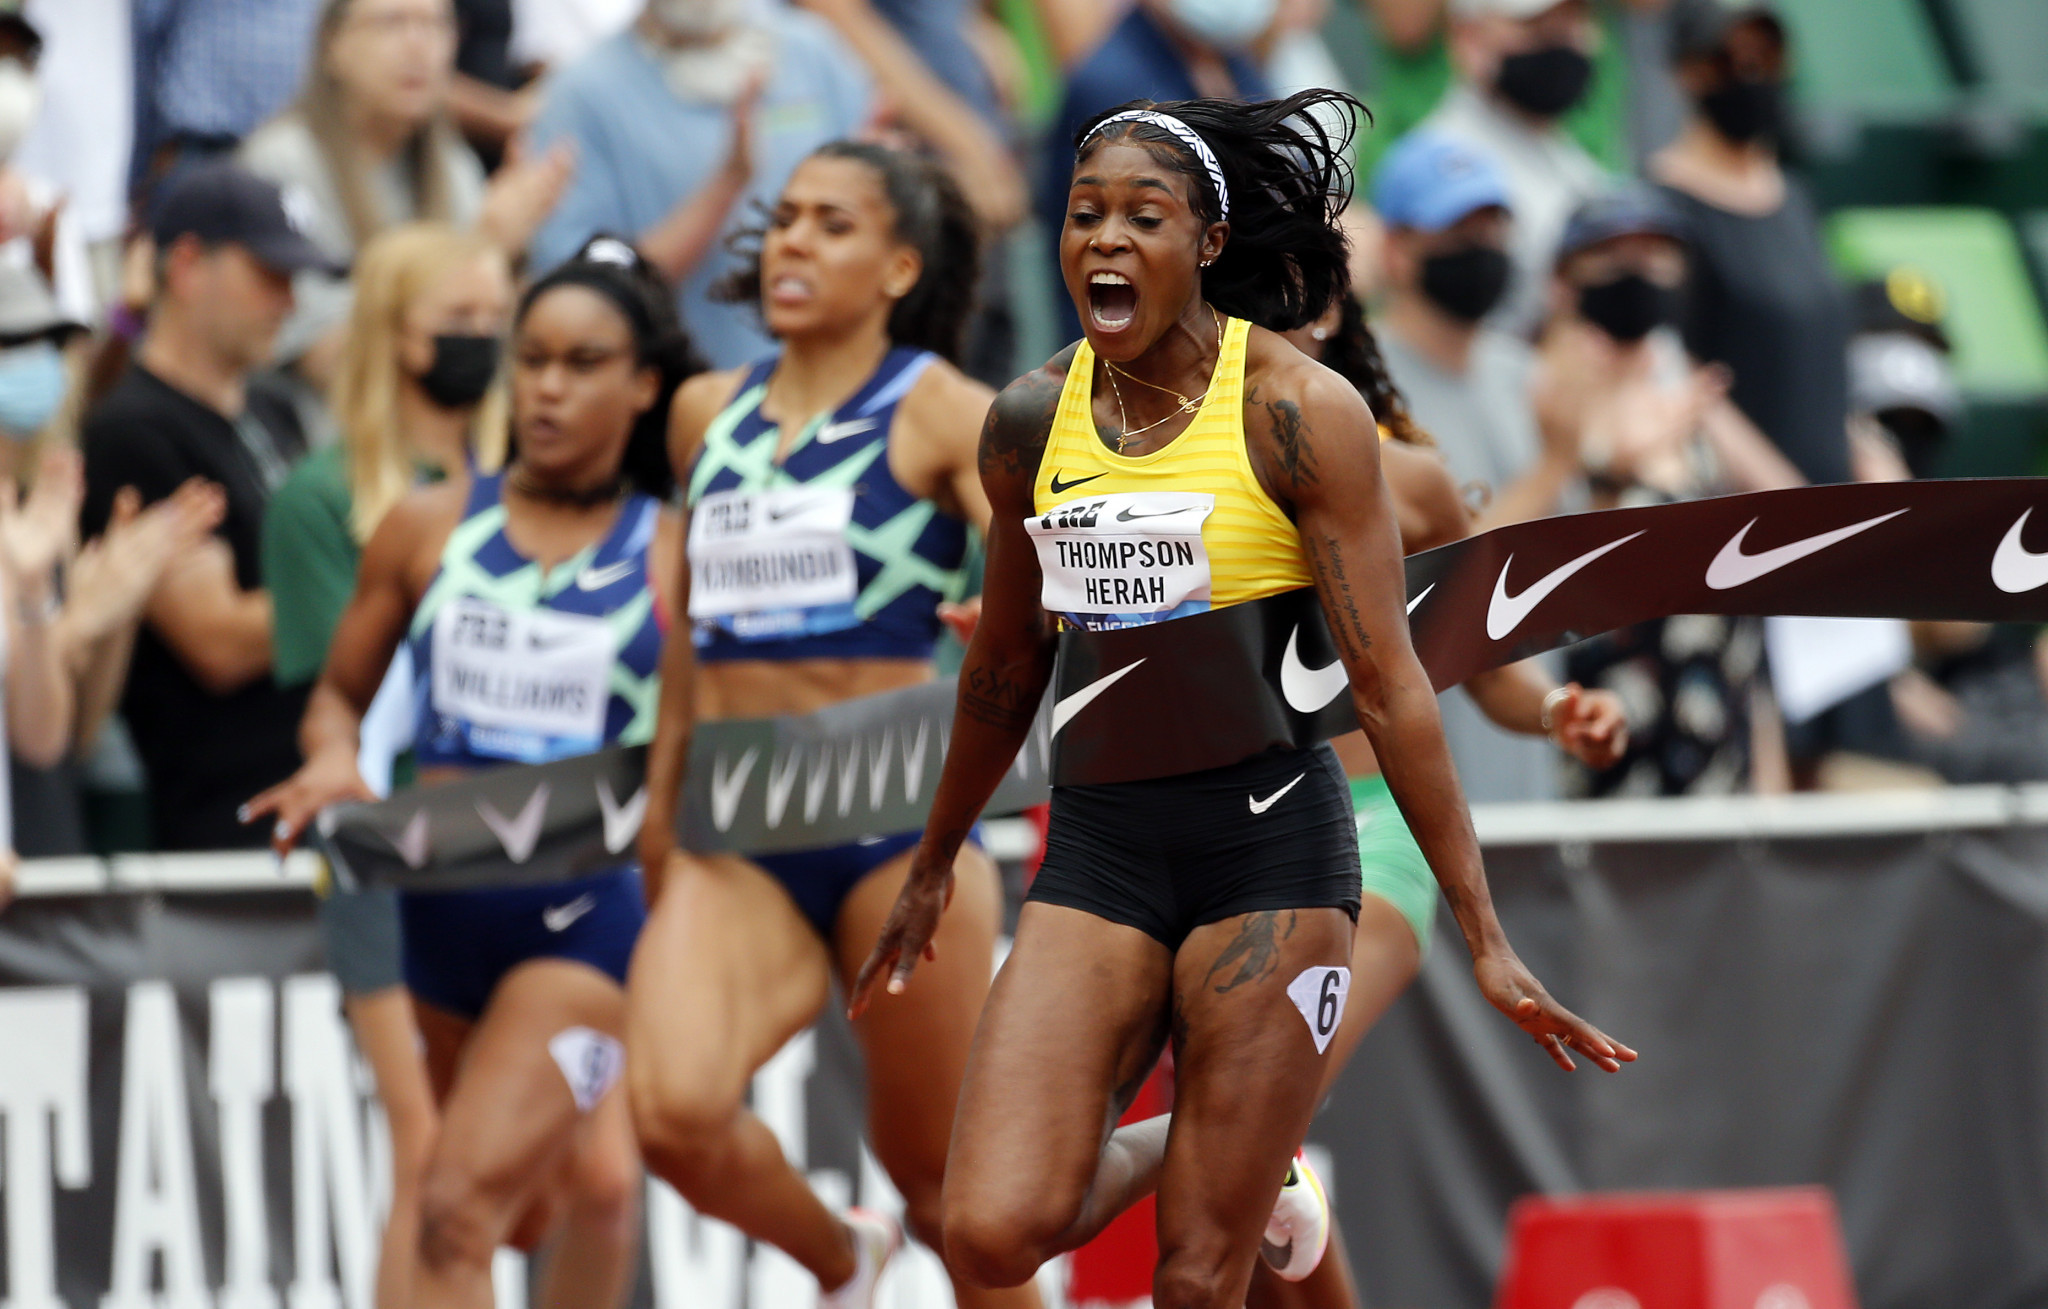 Jamaica suggests Thompson-Herah time should be recognised as 100m world record